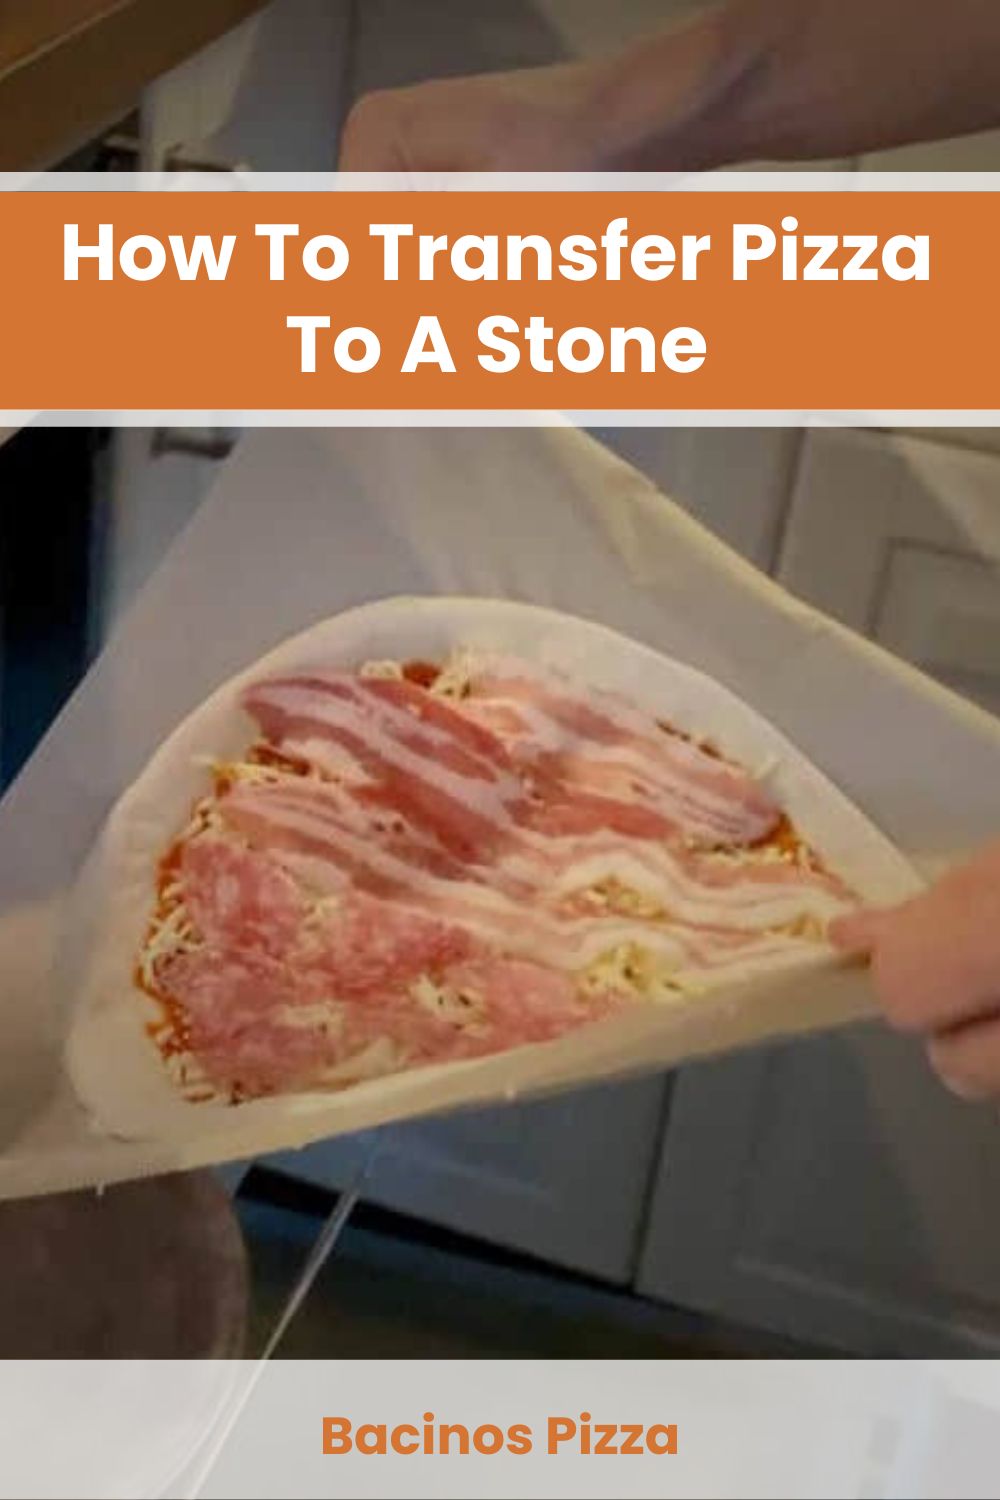 how To Transfer Pizza To A Stone